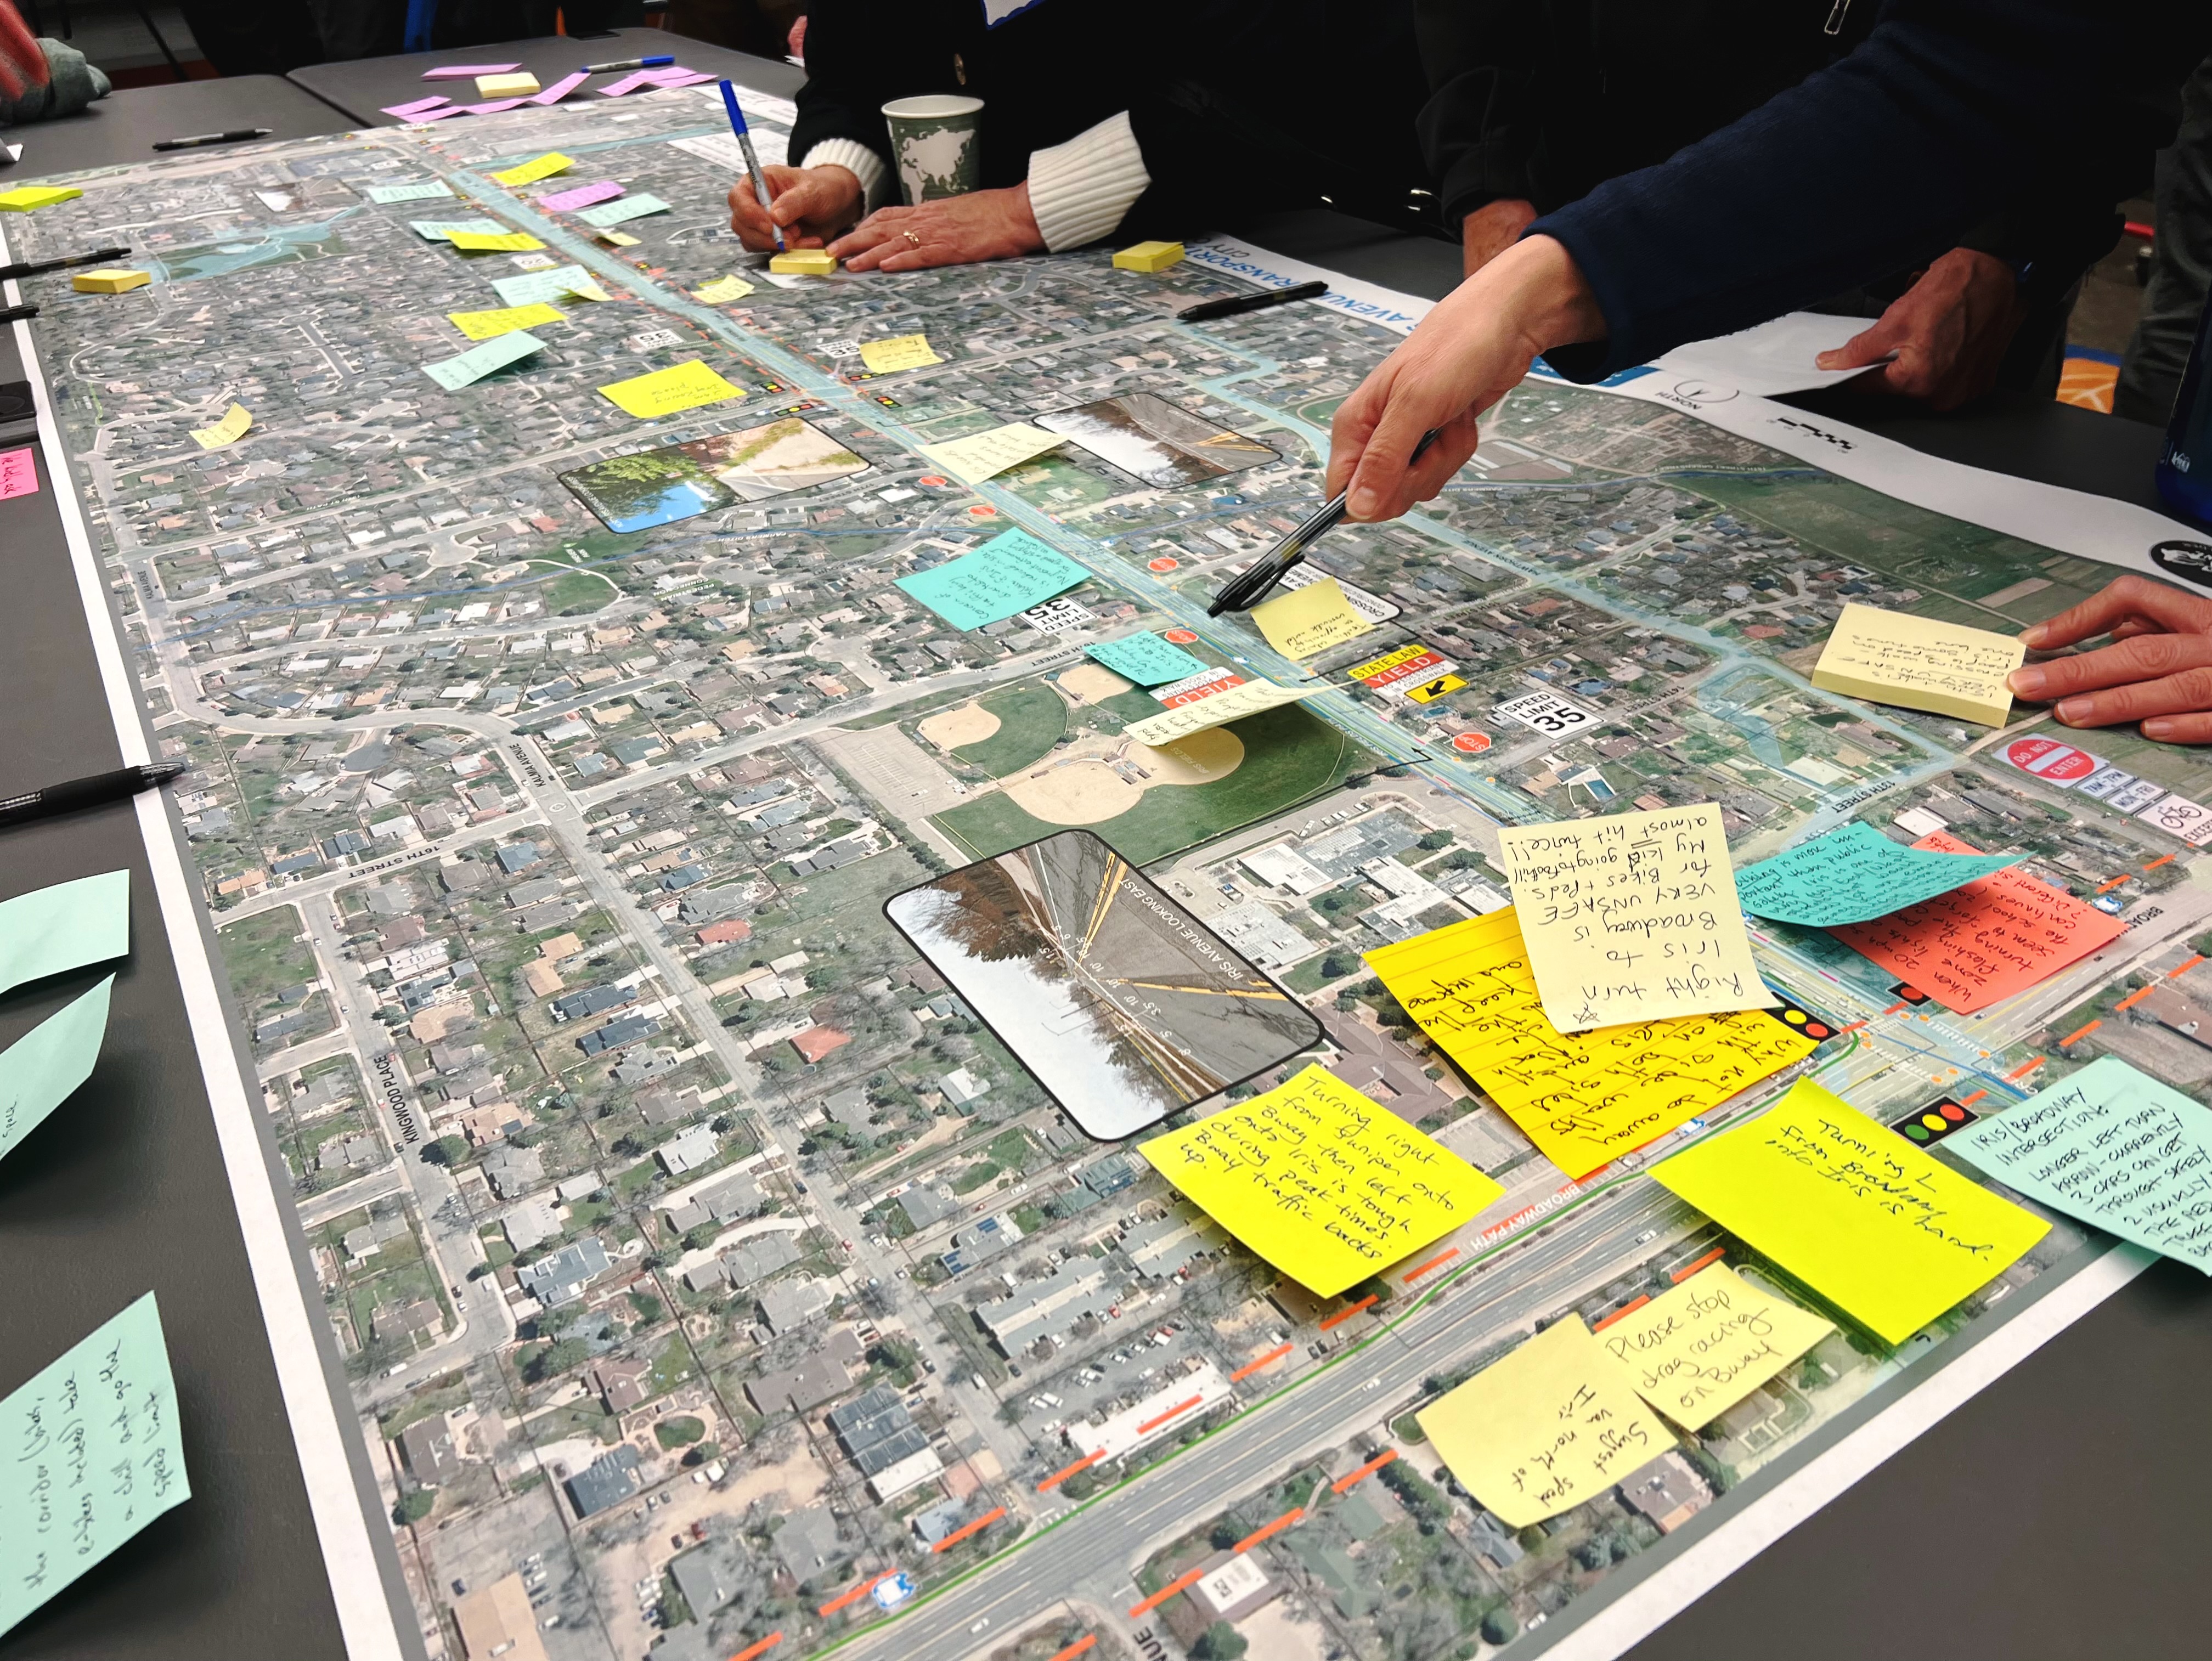 People writing down feedback and pointing to a map of Iris Avenue.